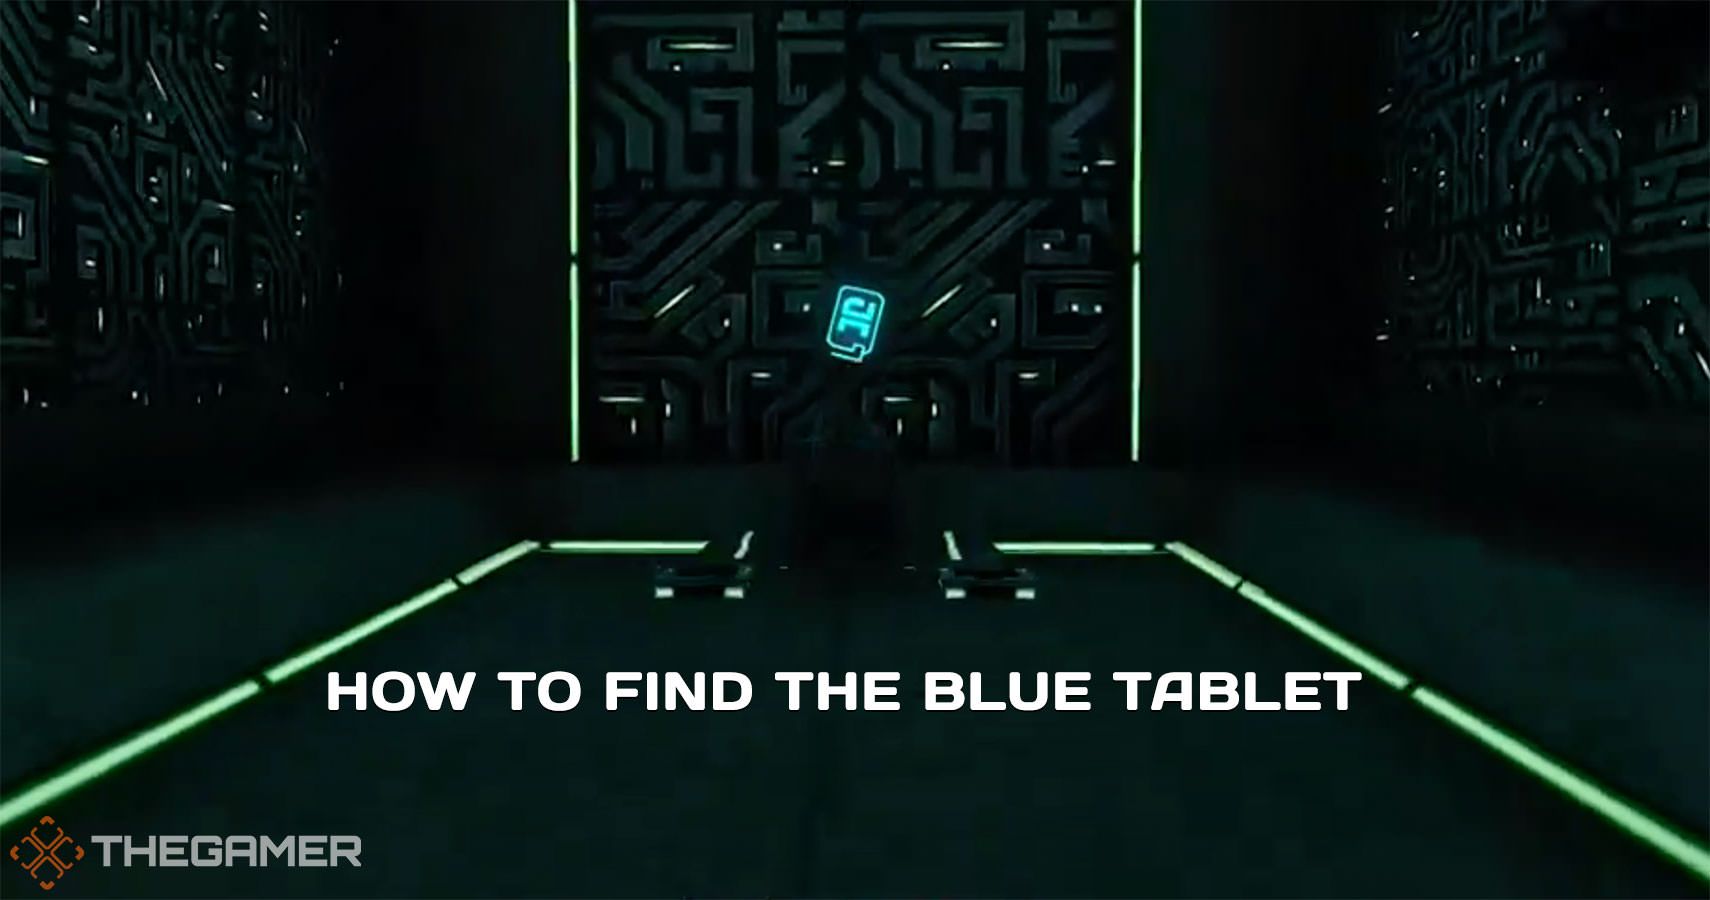 How To Find The Blue Tablet